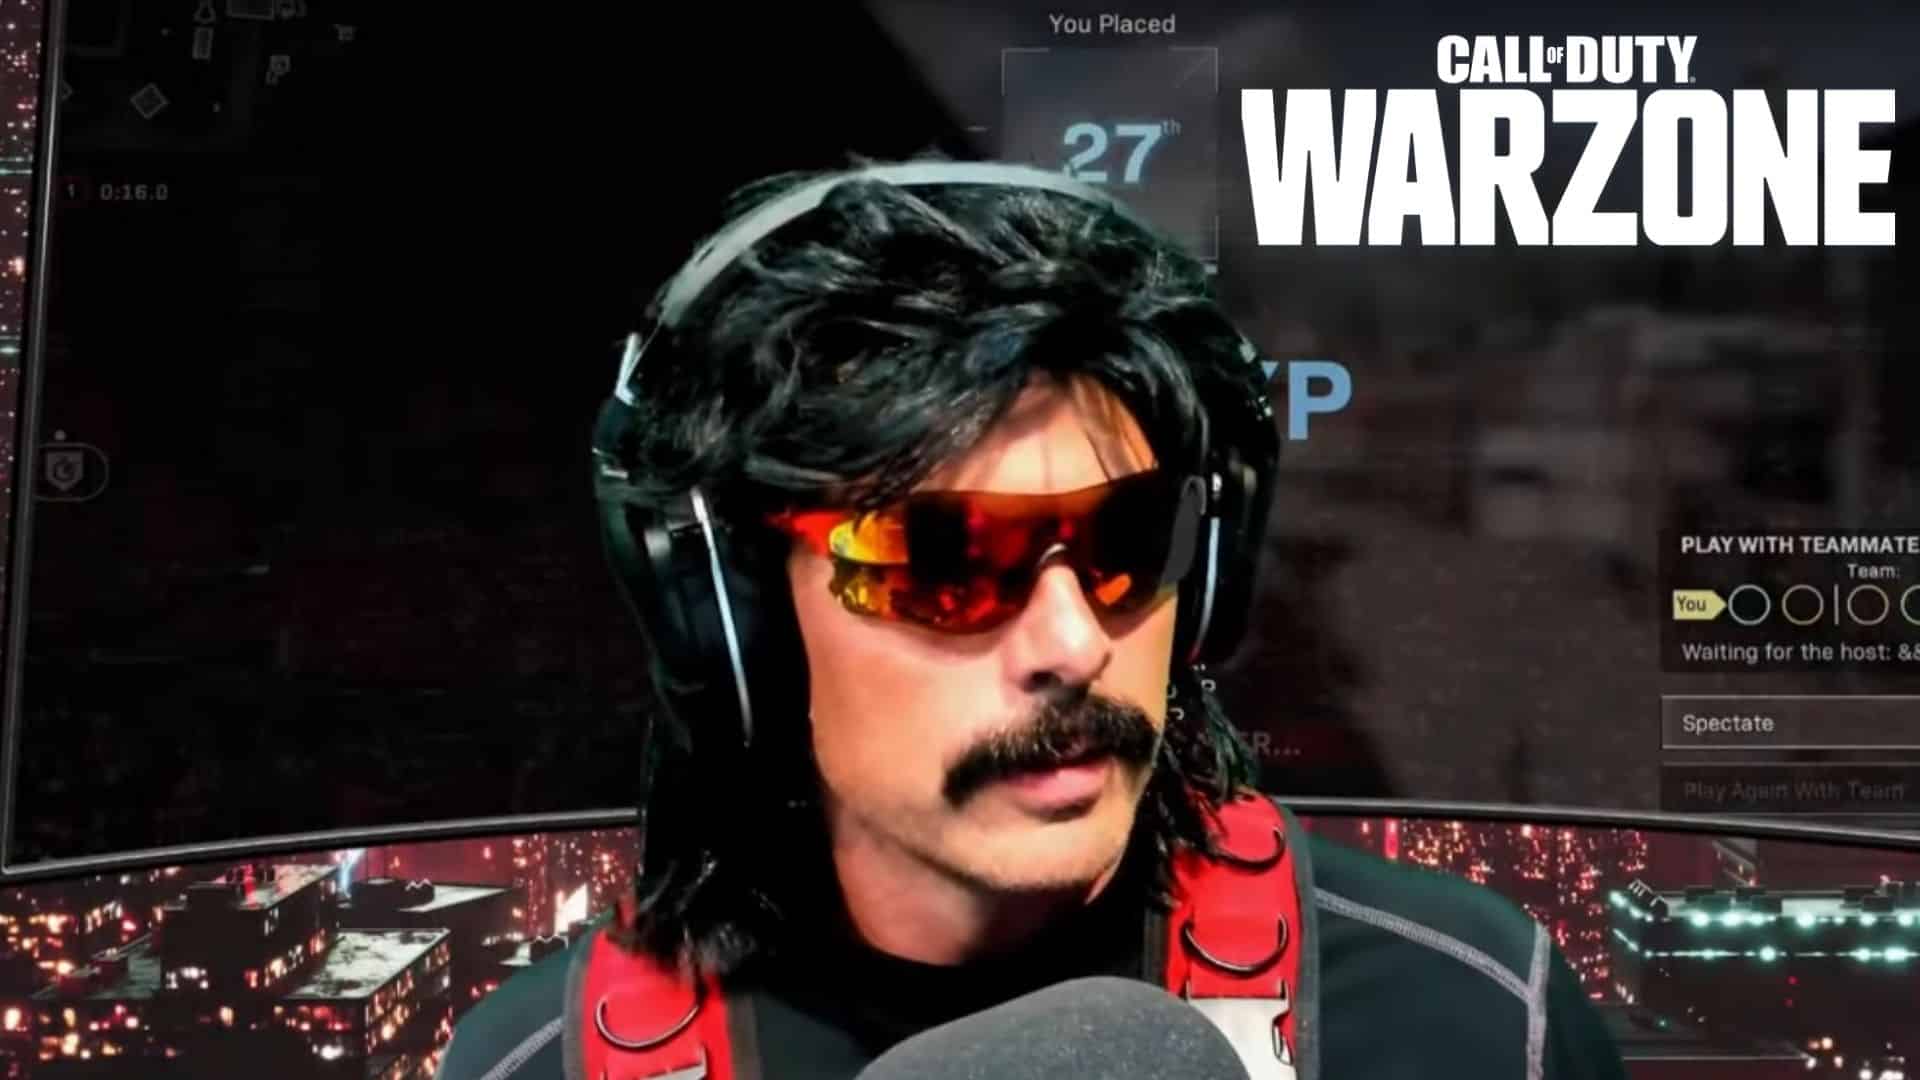 Dr Disrespect in Warzone post-match lobby